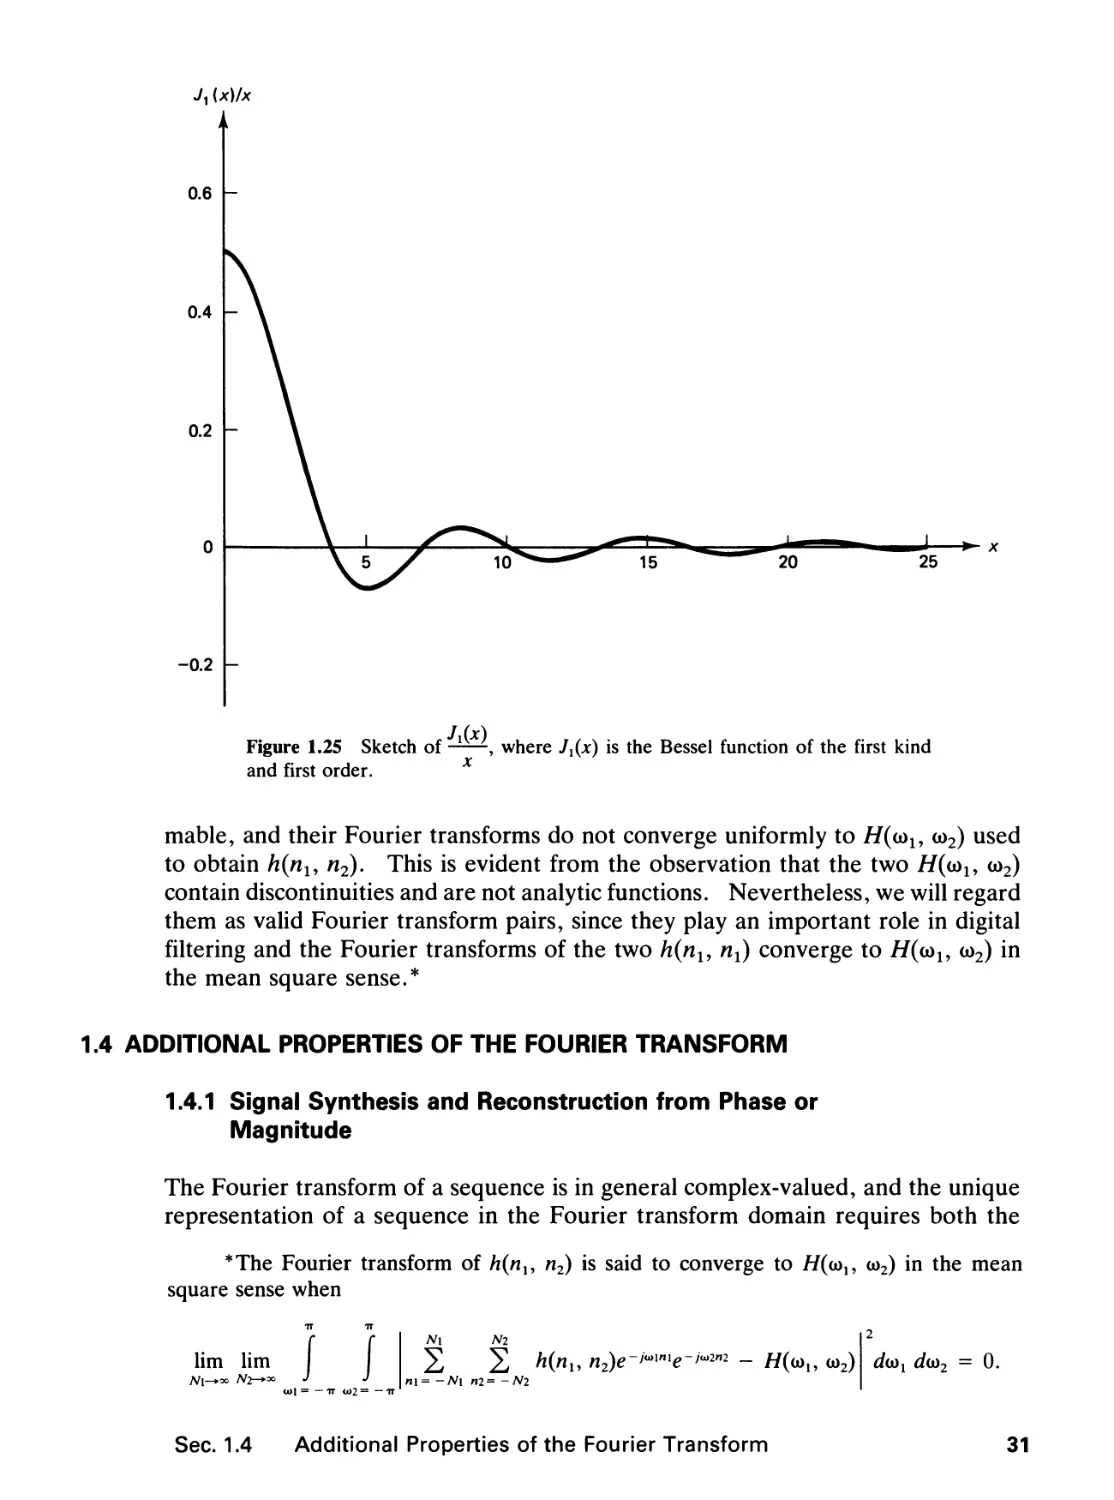 1.4 Additional Properties of the Fourier Transform